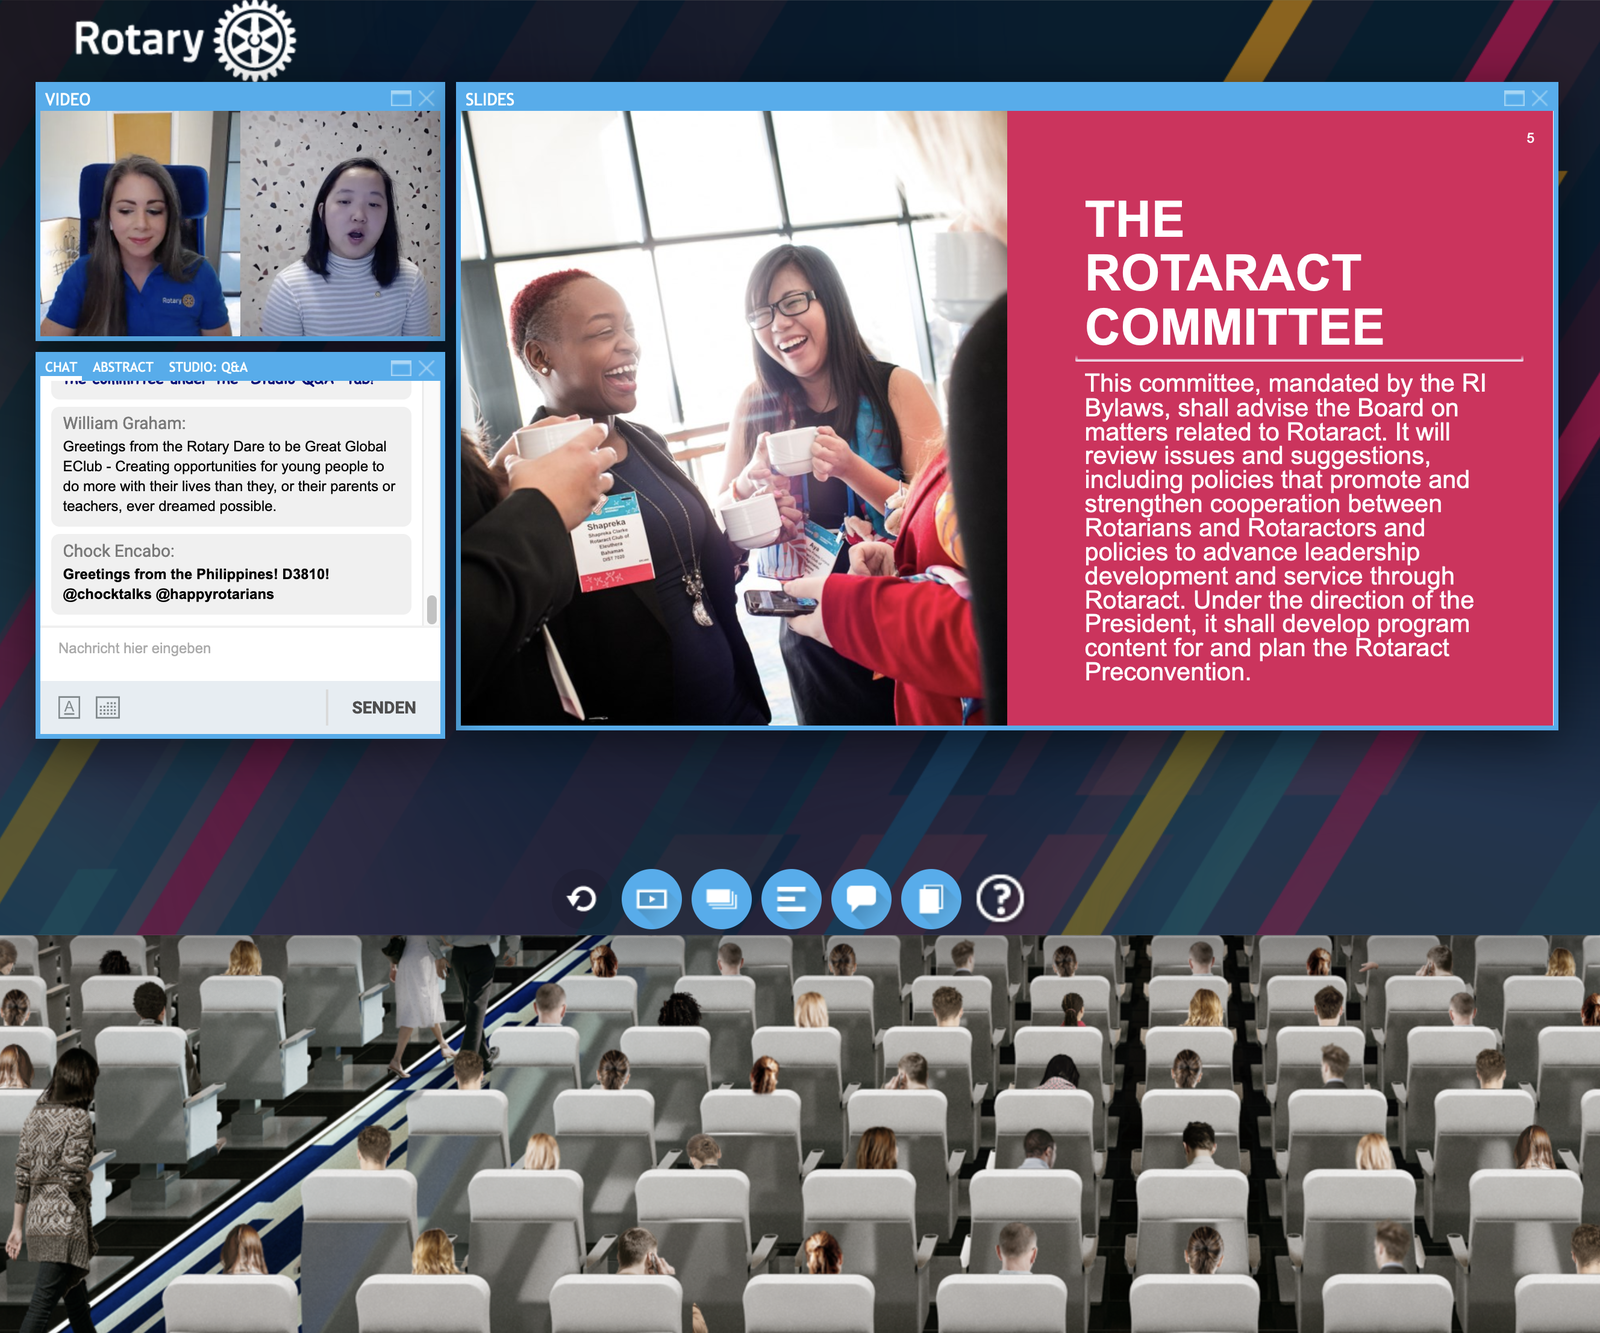 2021, breakout session, convention, pre-convention, rotaract